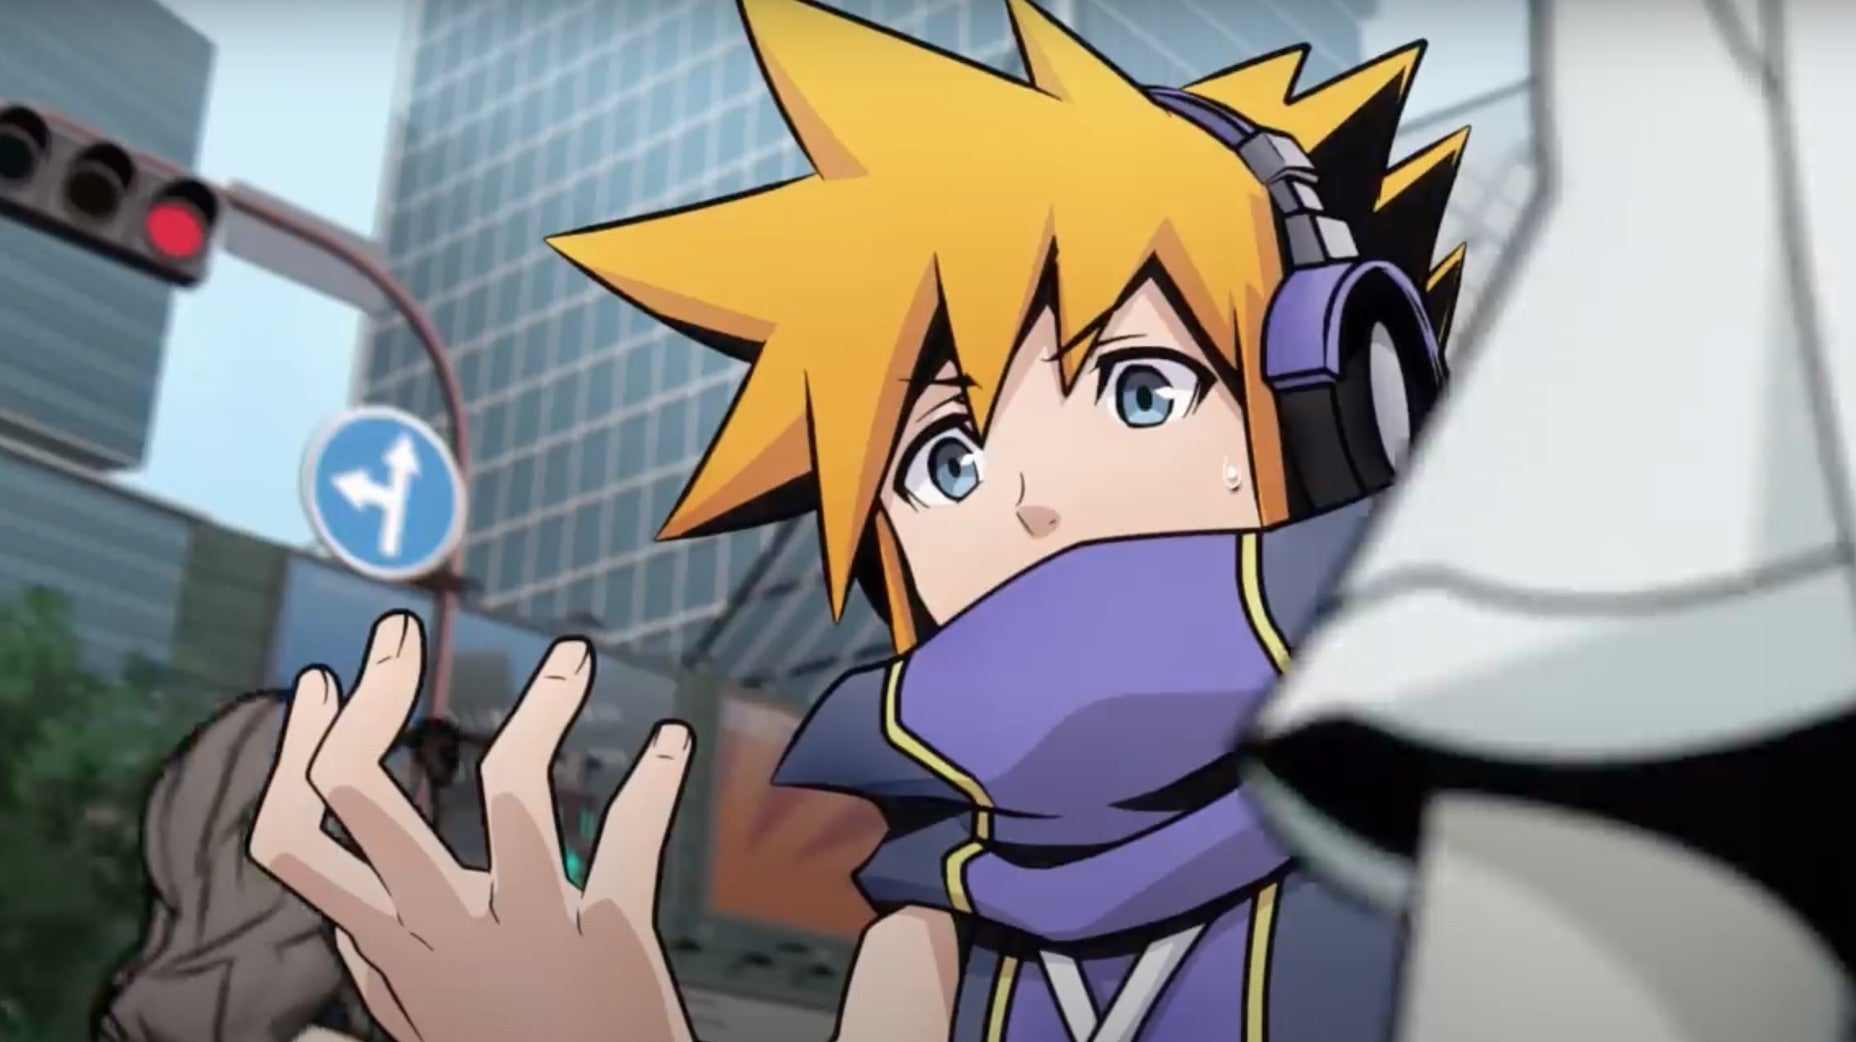 Image for JRPG classic The World Ends With You's anime adaption gets a new trailer